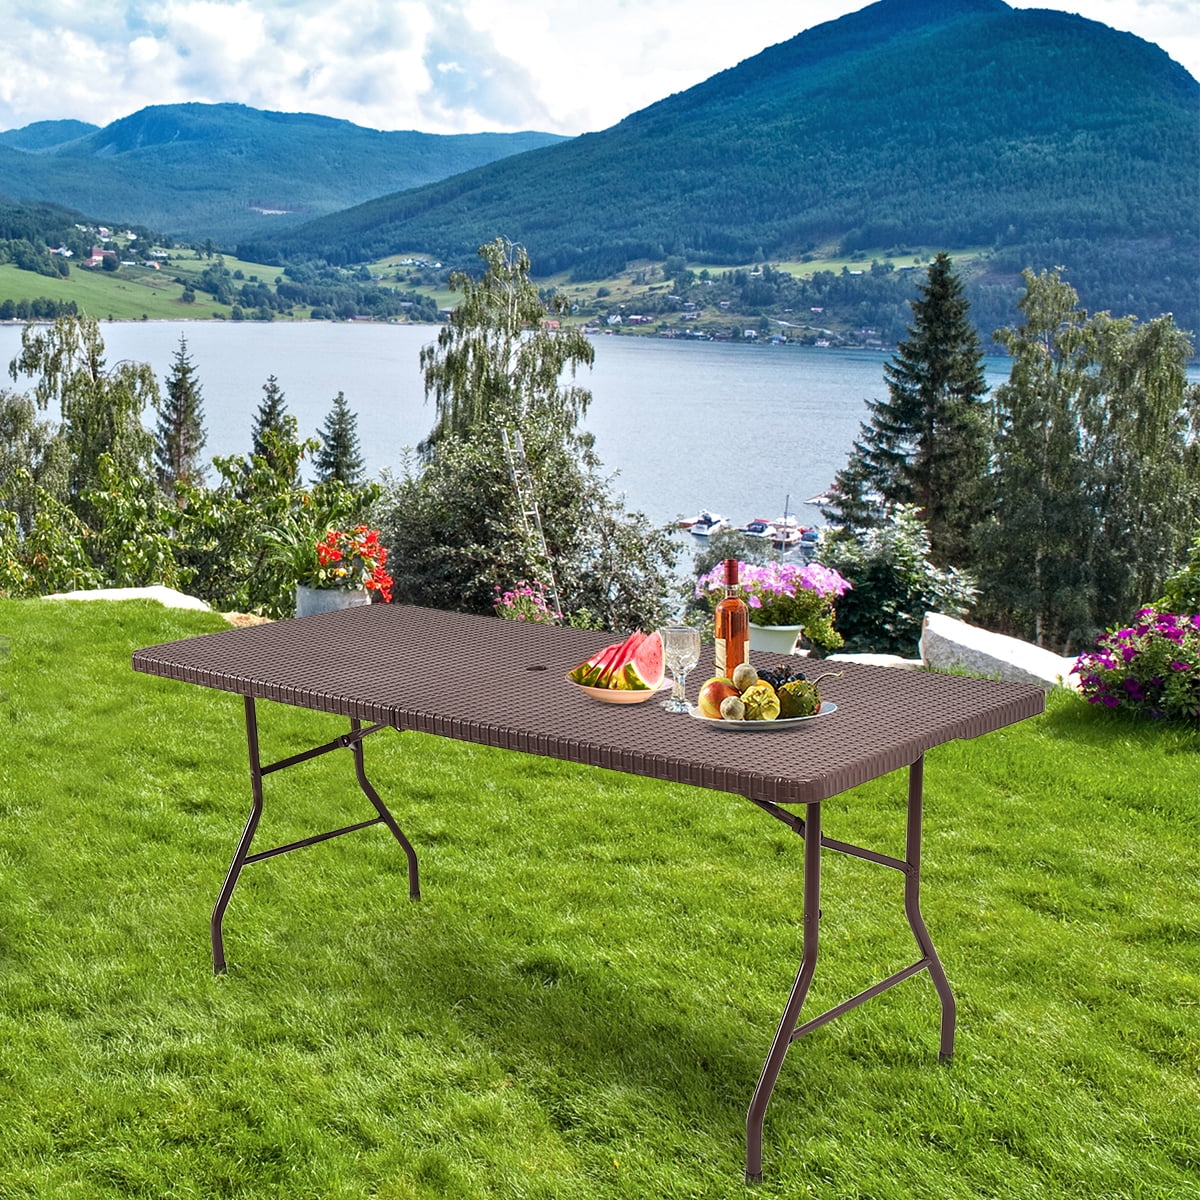 ShunFuET Indoor Outdoor Folding Picnic Dining Table 